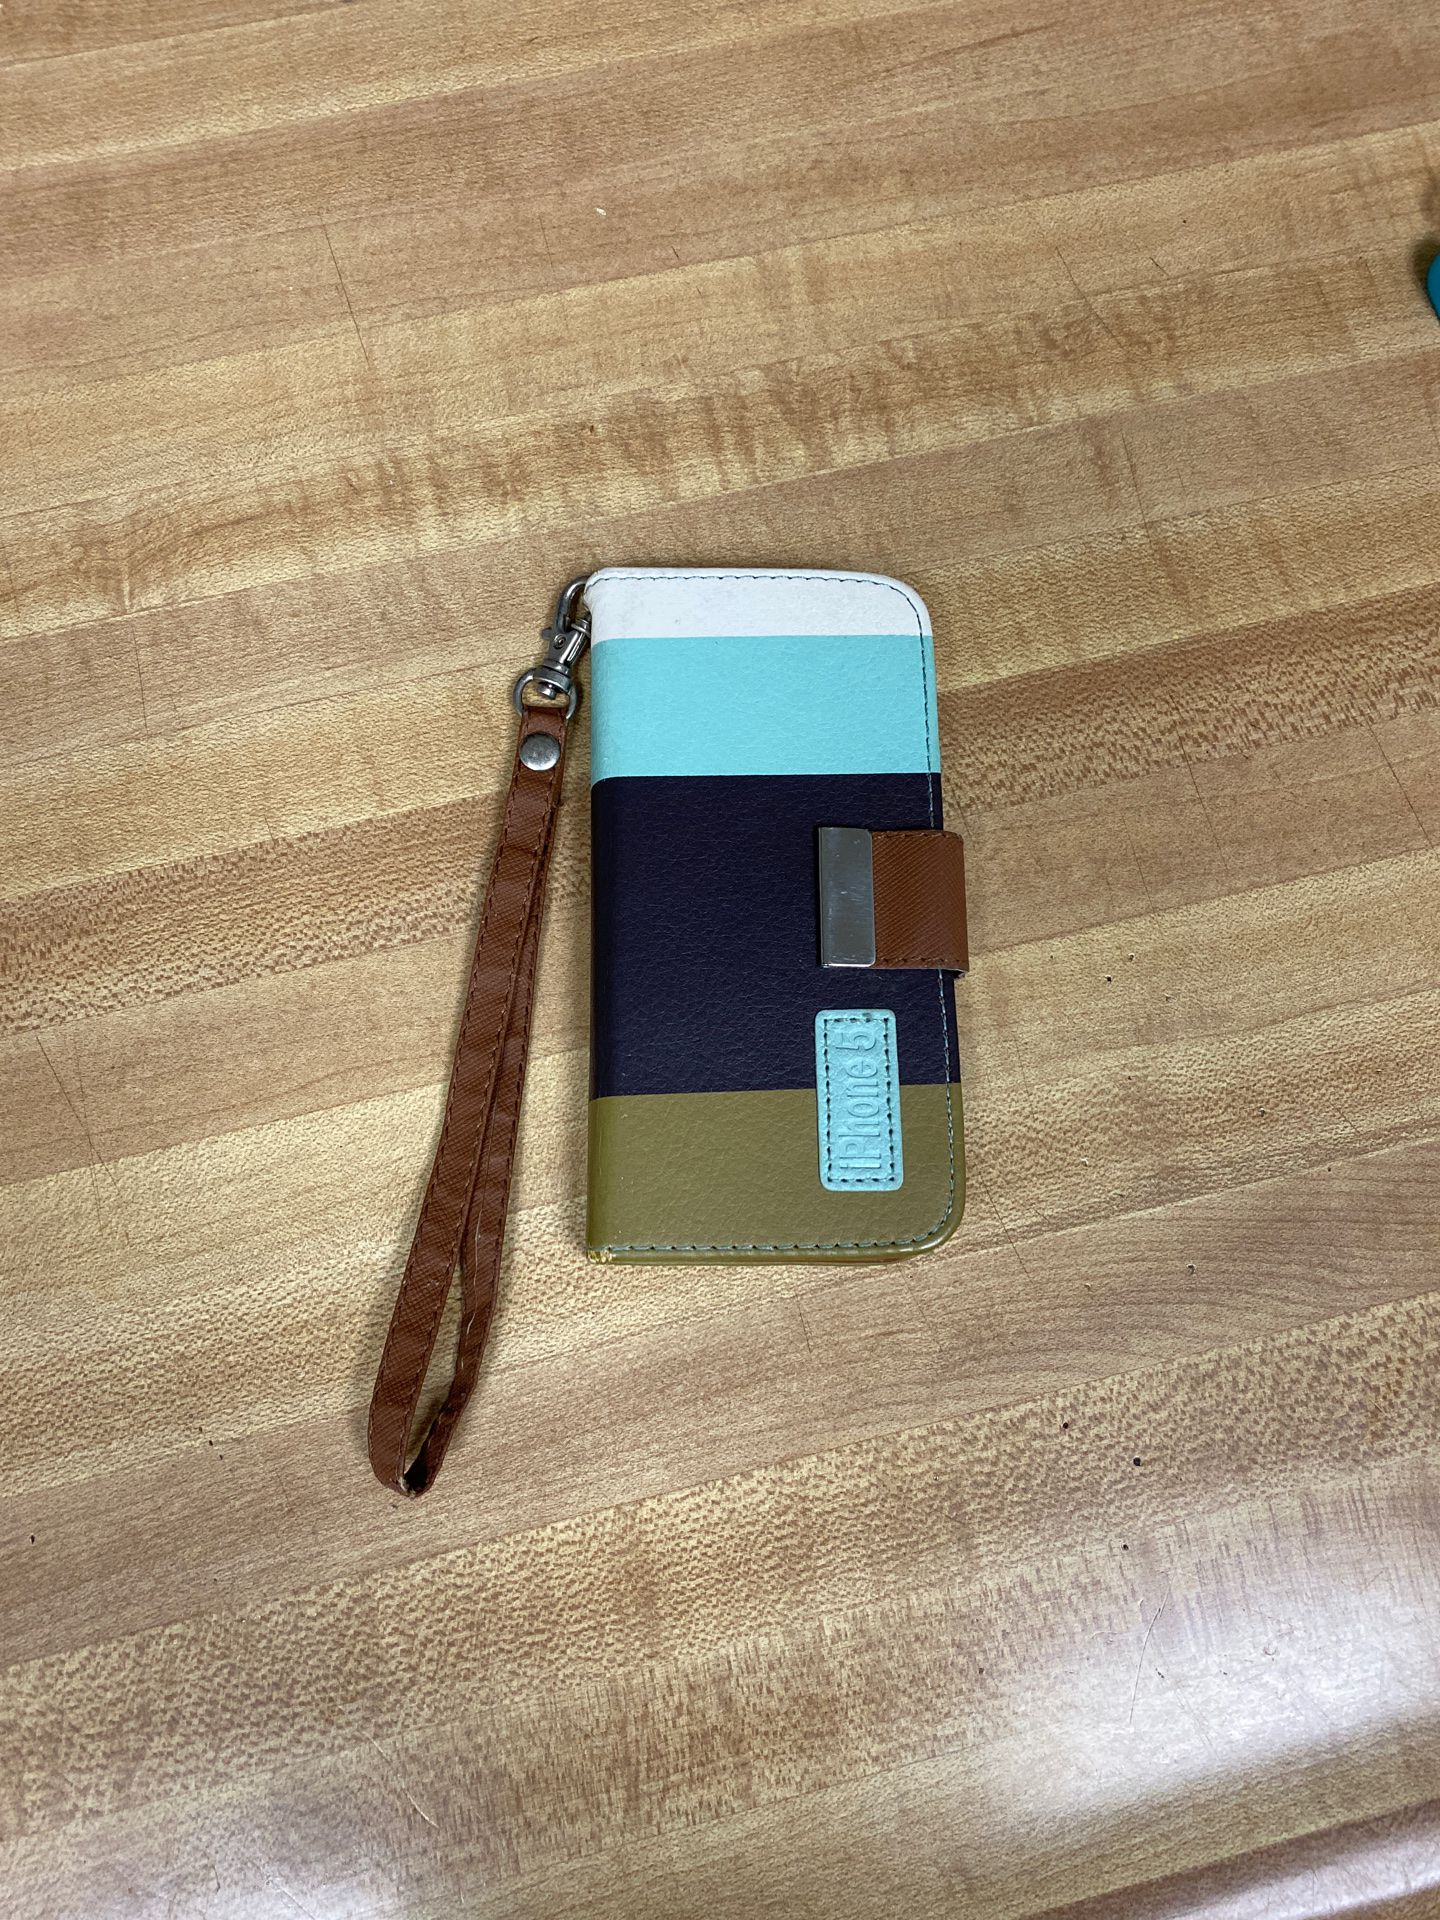 iPhone 5 Case/Wallet for Sale